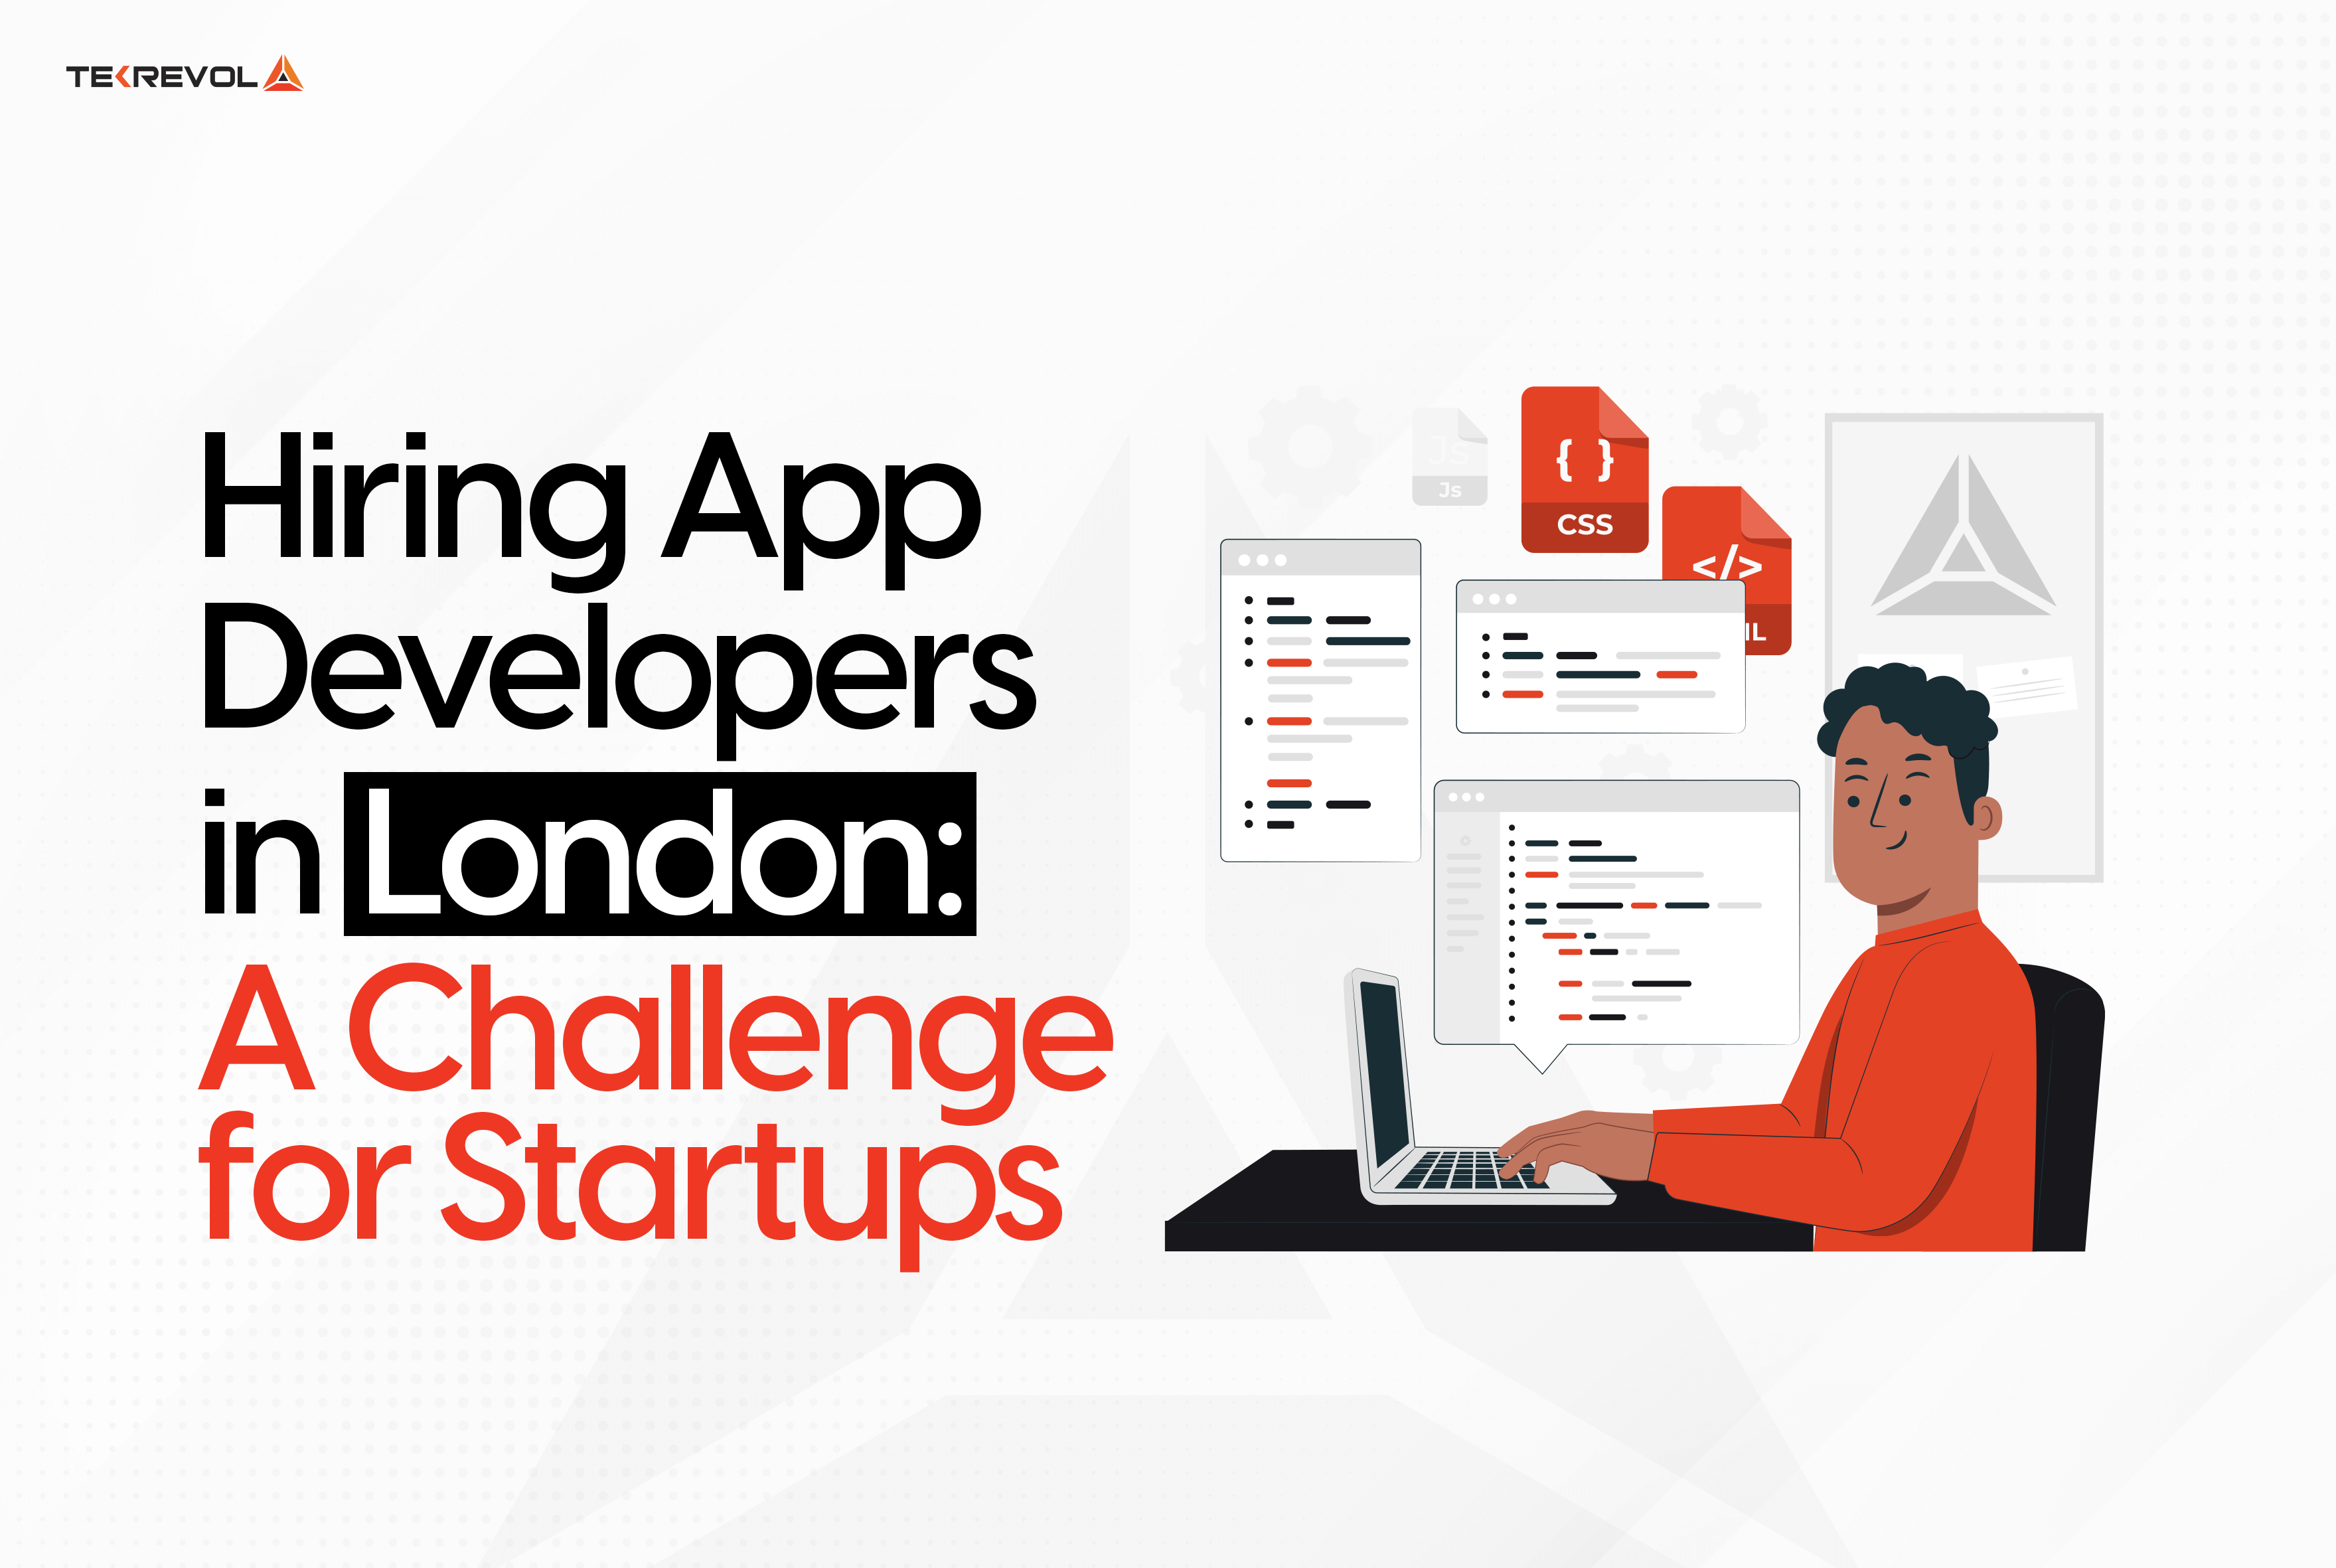 Hiring-App-Developers-in-London-a-Challenge-for-Startups